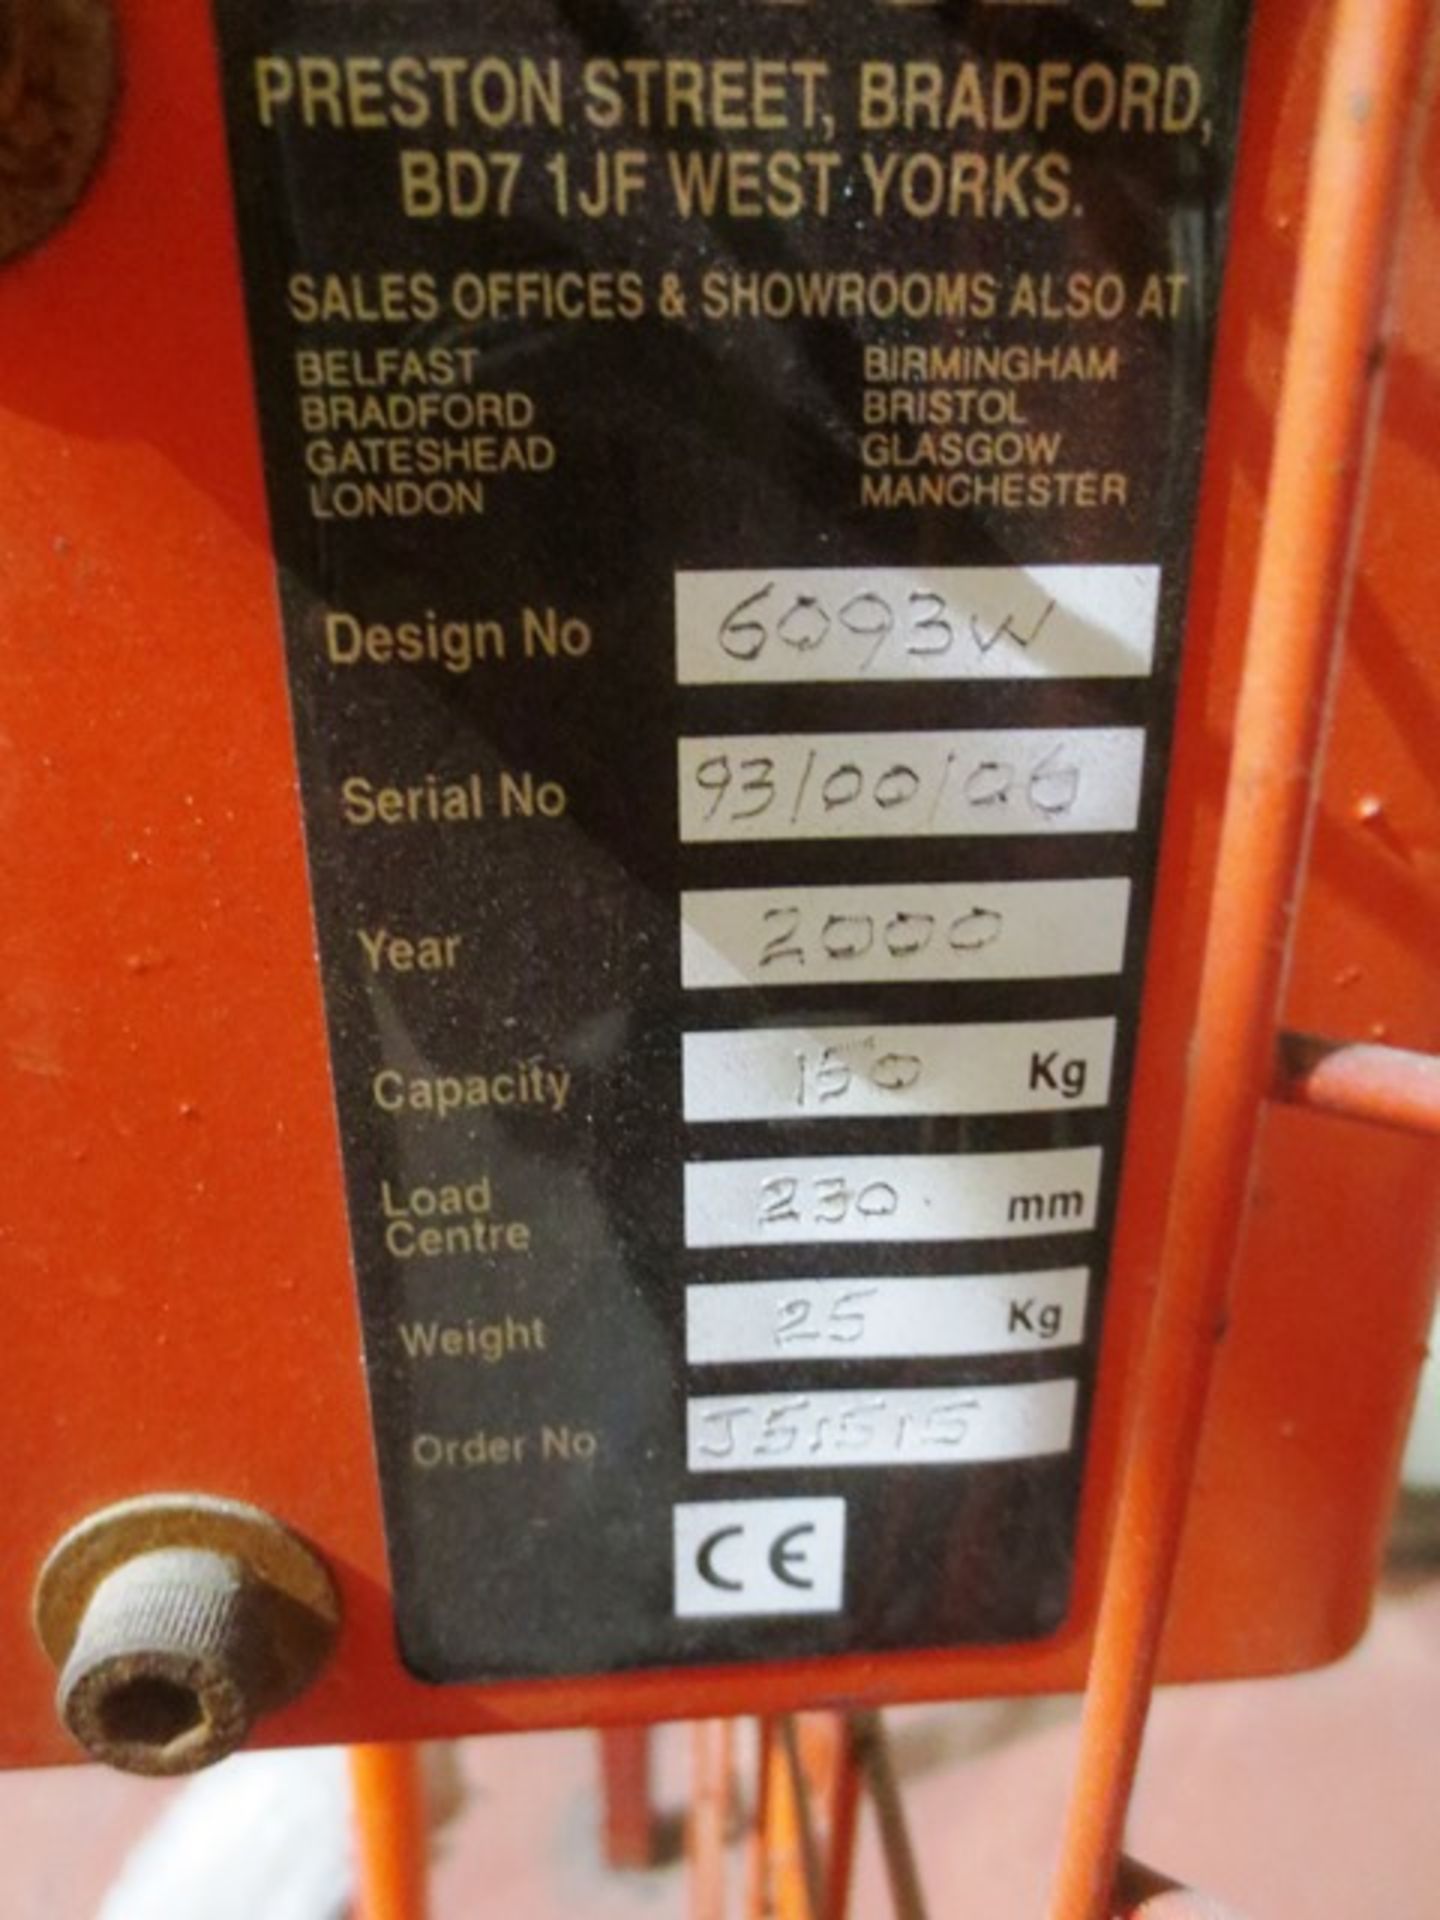 Slingsby 5093W, 150kg max capacity winch stacker, max height 250mm, serial no: 93/00/06 (2000) ( - Image 2 of 2